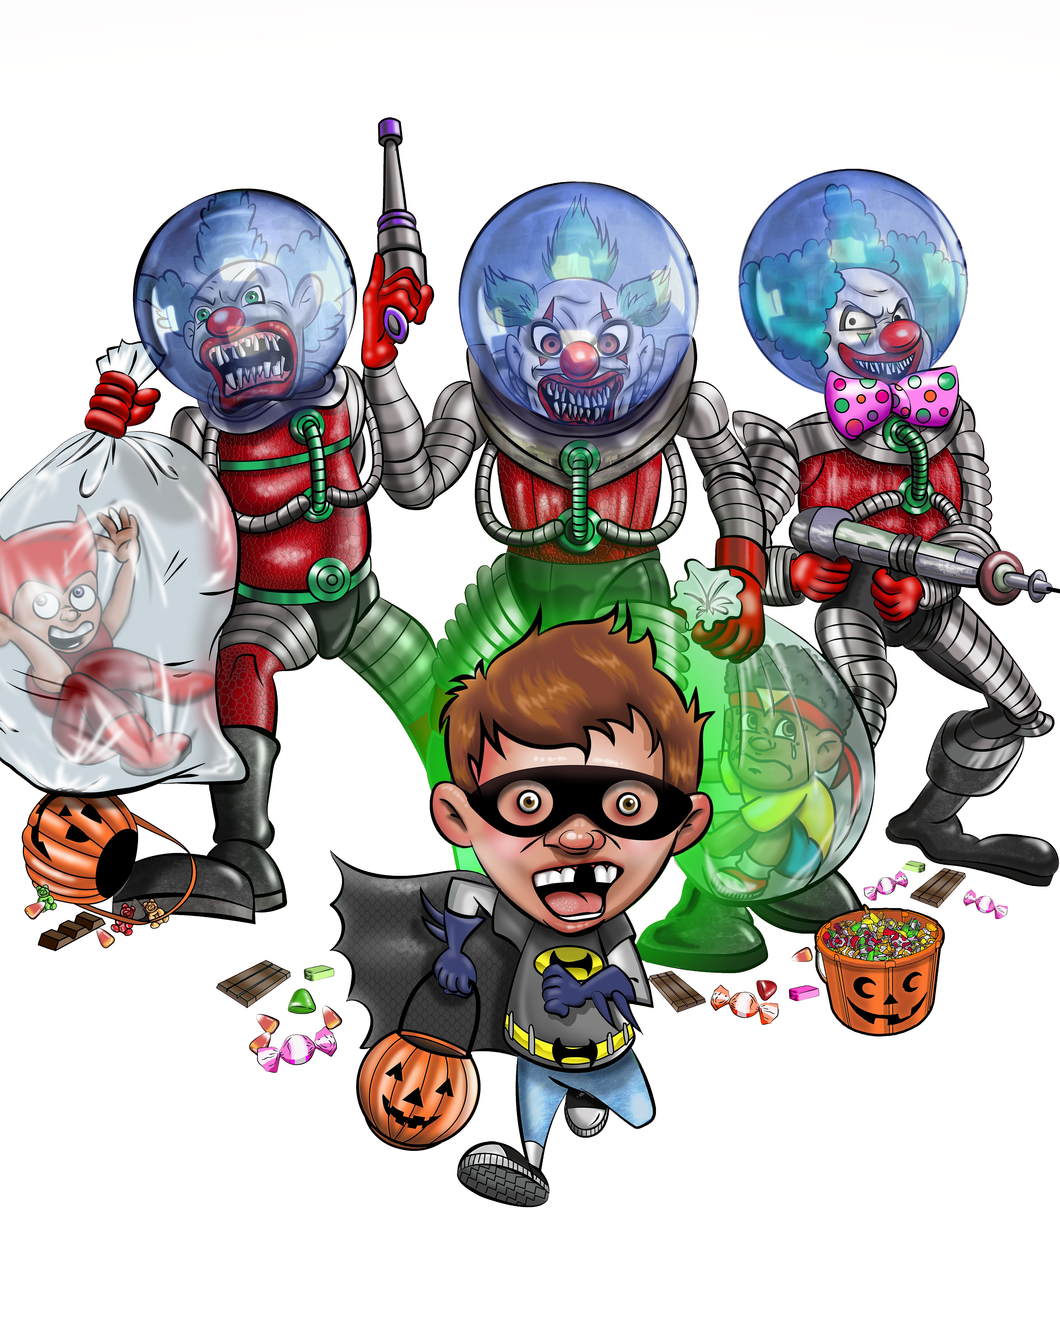 An original Bad Aura Media art print featuring a group of trick-or-treaters running from zombie clowns from outer space.